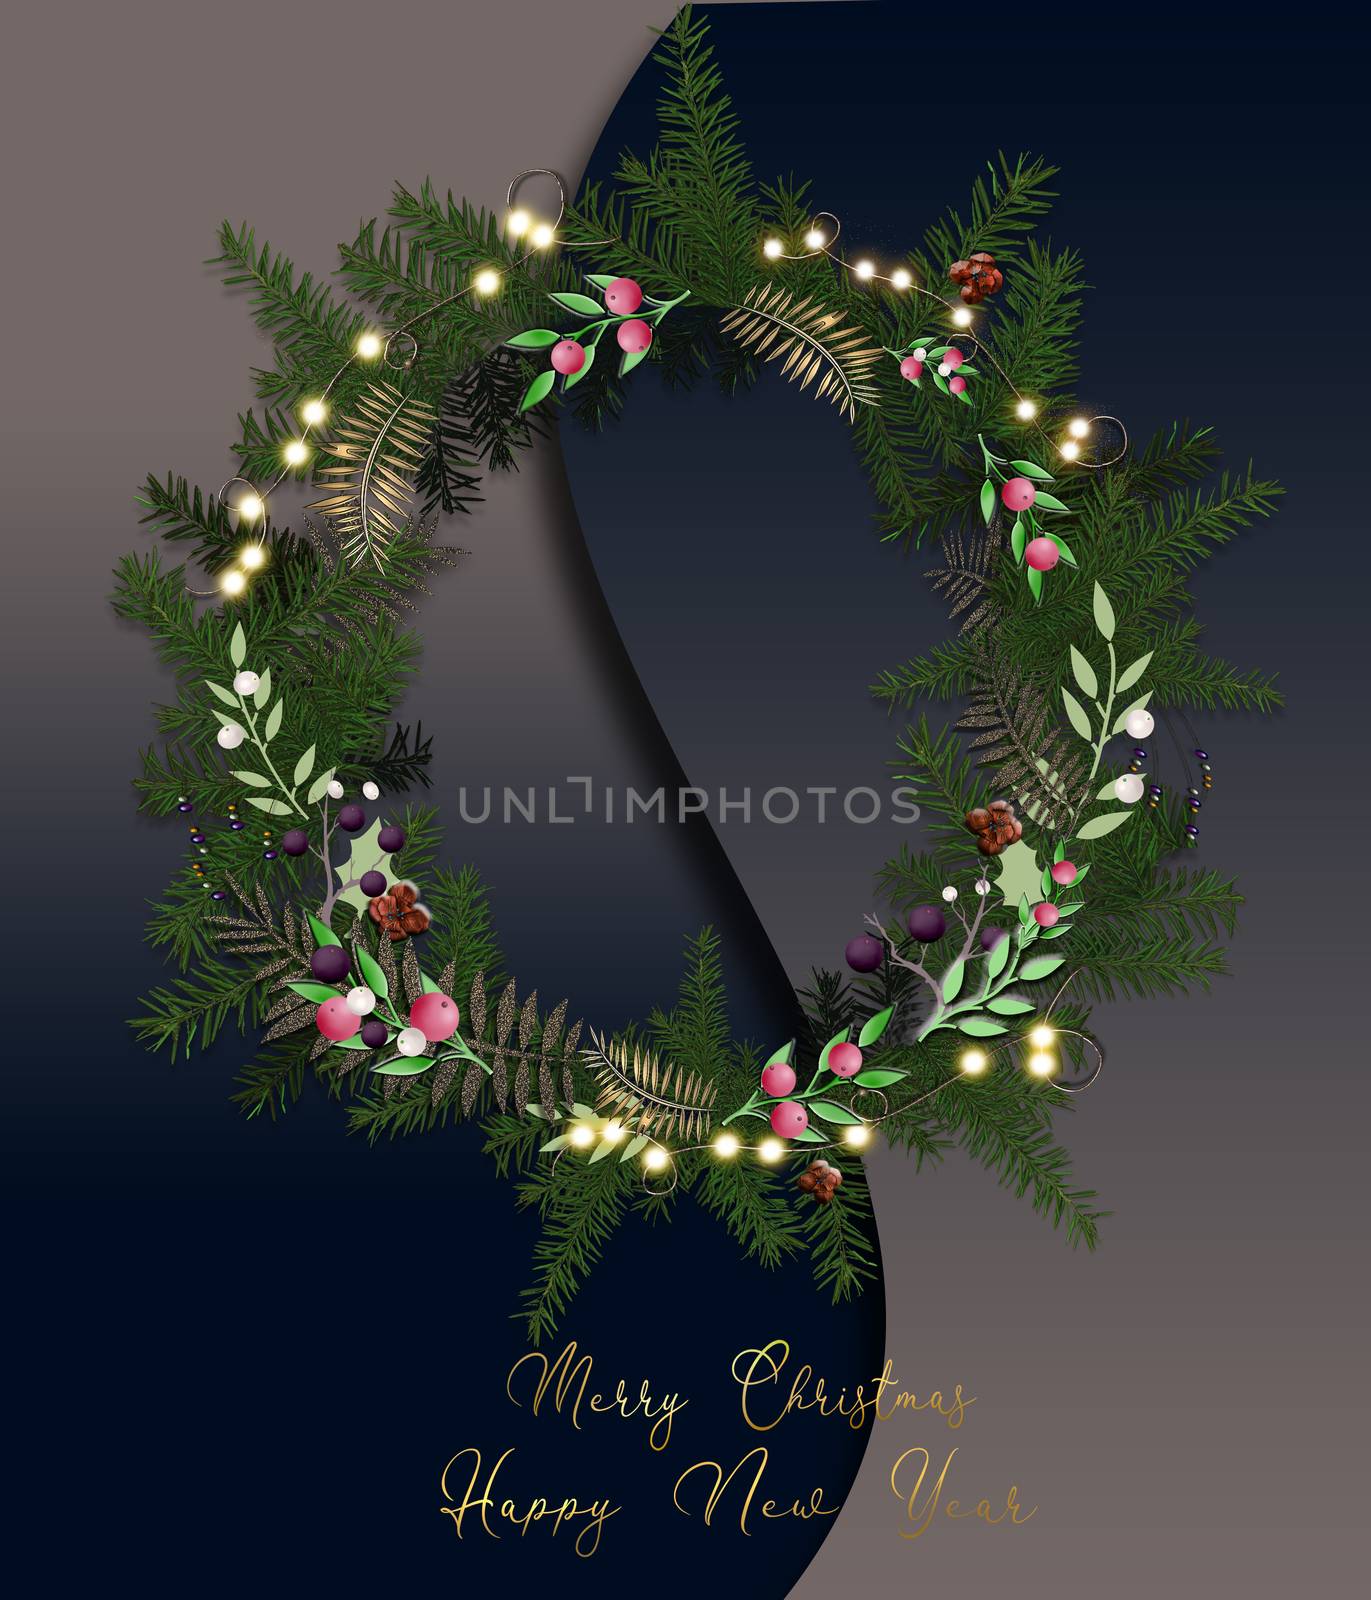 Christmas Wreath. Luxury trendy floral design of Wreath, lights and decorations. Gold text Merry Christmas Happy New Year over blue background. Greetings, 2021 stylish design, flyer 3D illustration